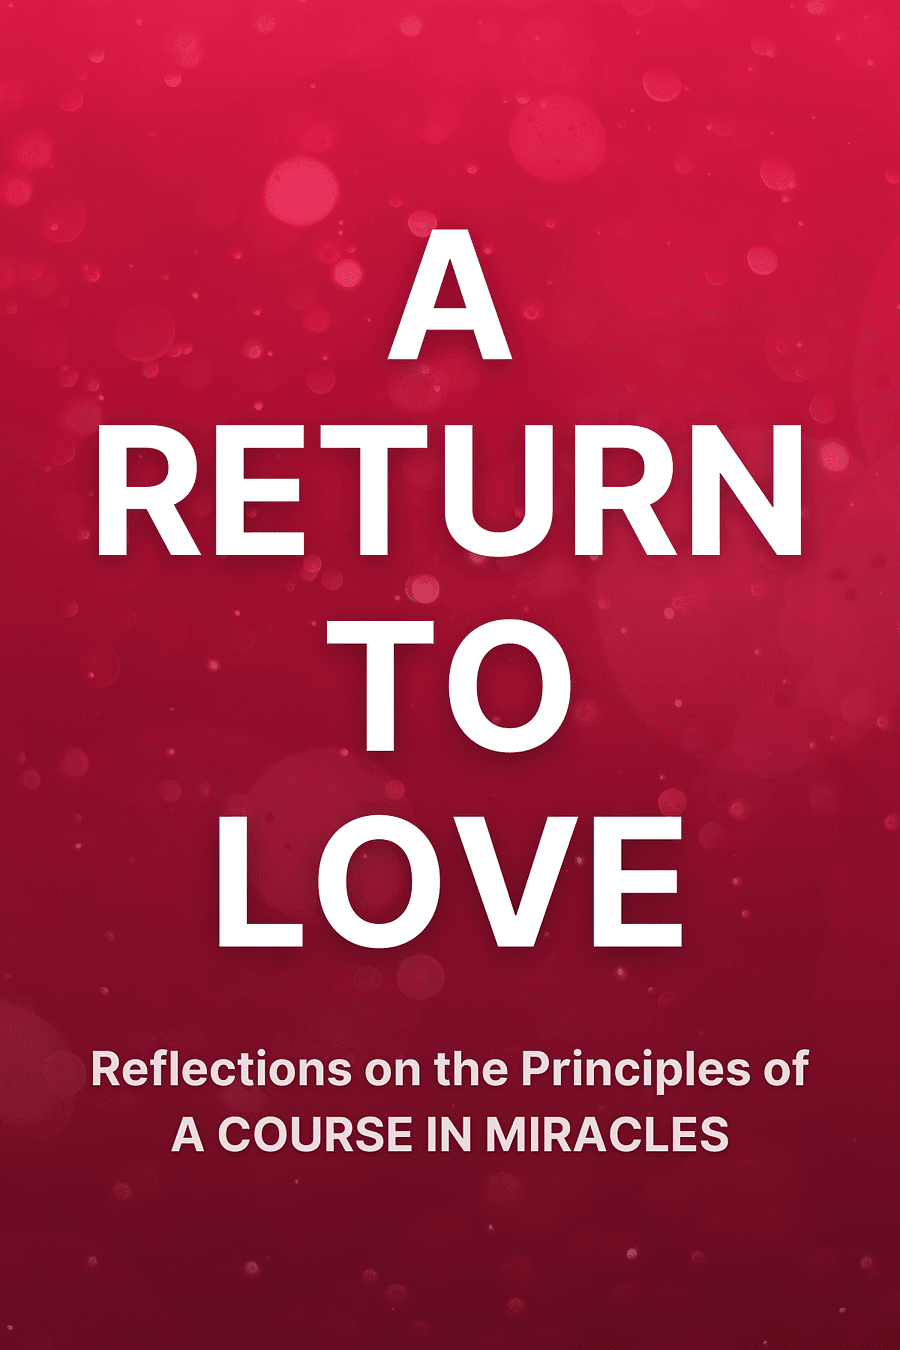 A Return to Love by Marianne Williamson - Book Summary